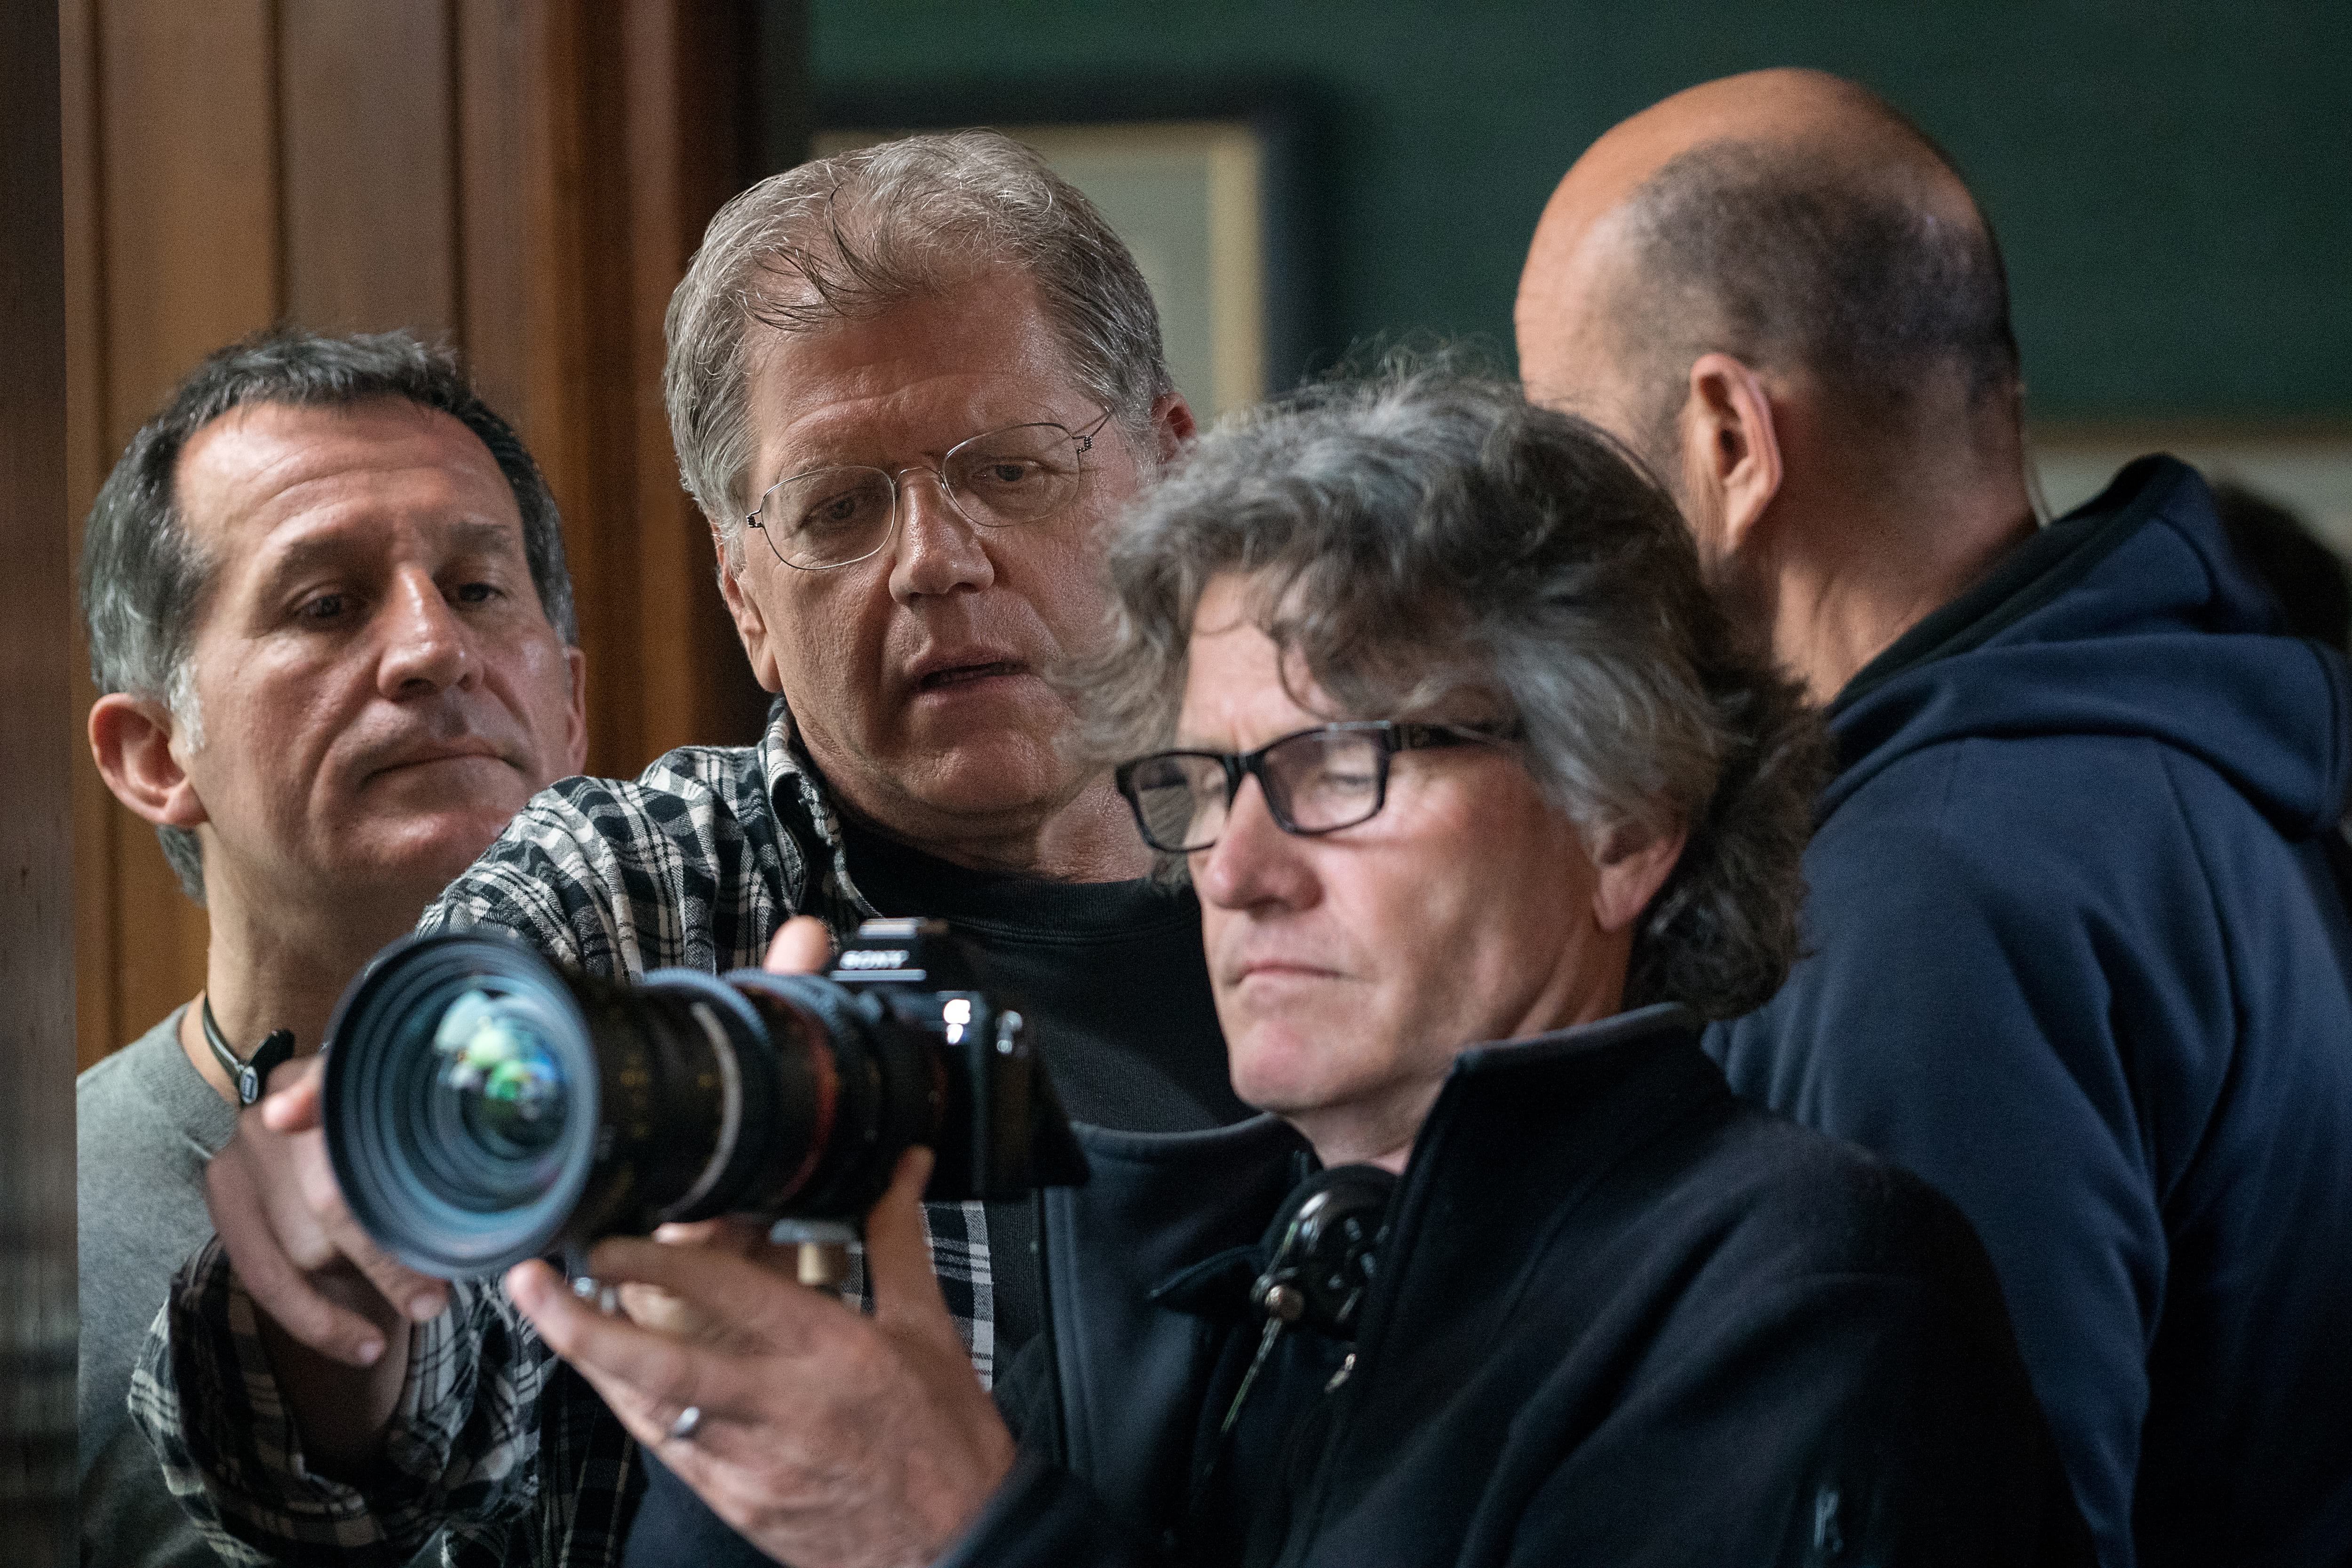 Director Robert Zemeckis and director of photography Don Burgess, ASC on the set of Allied.